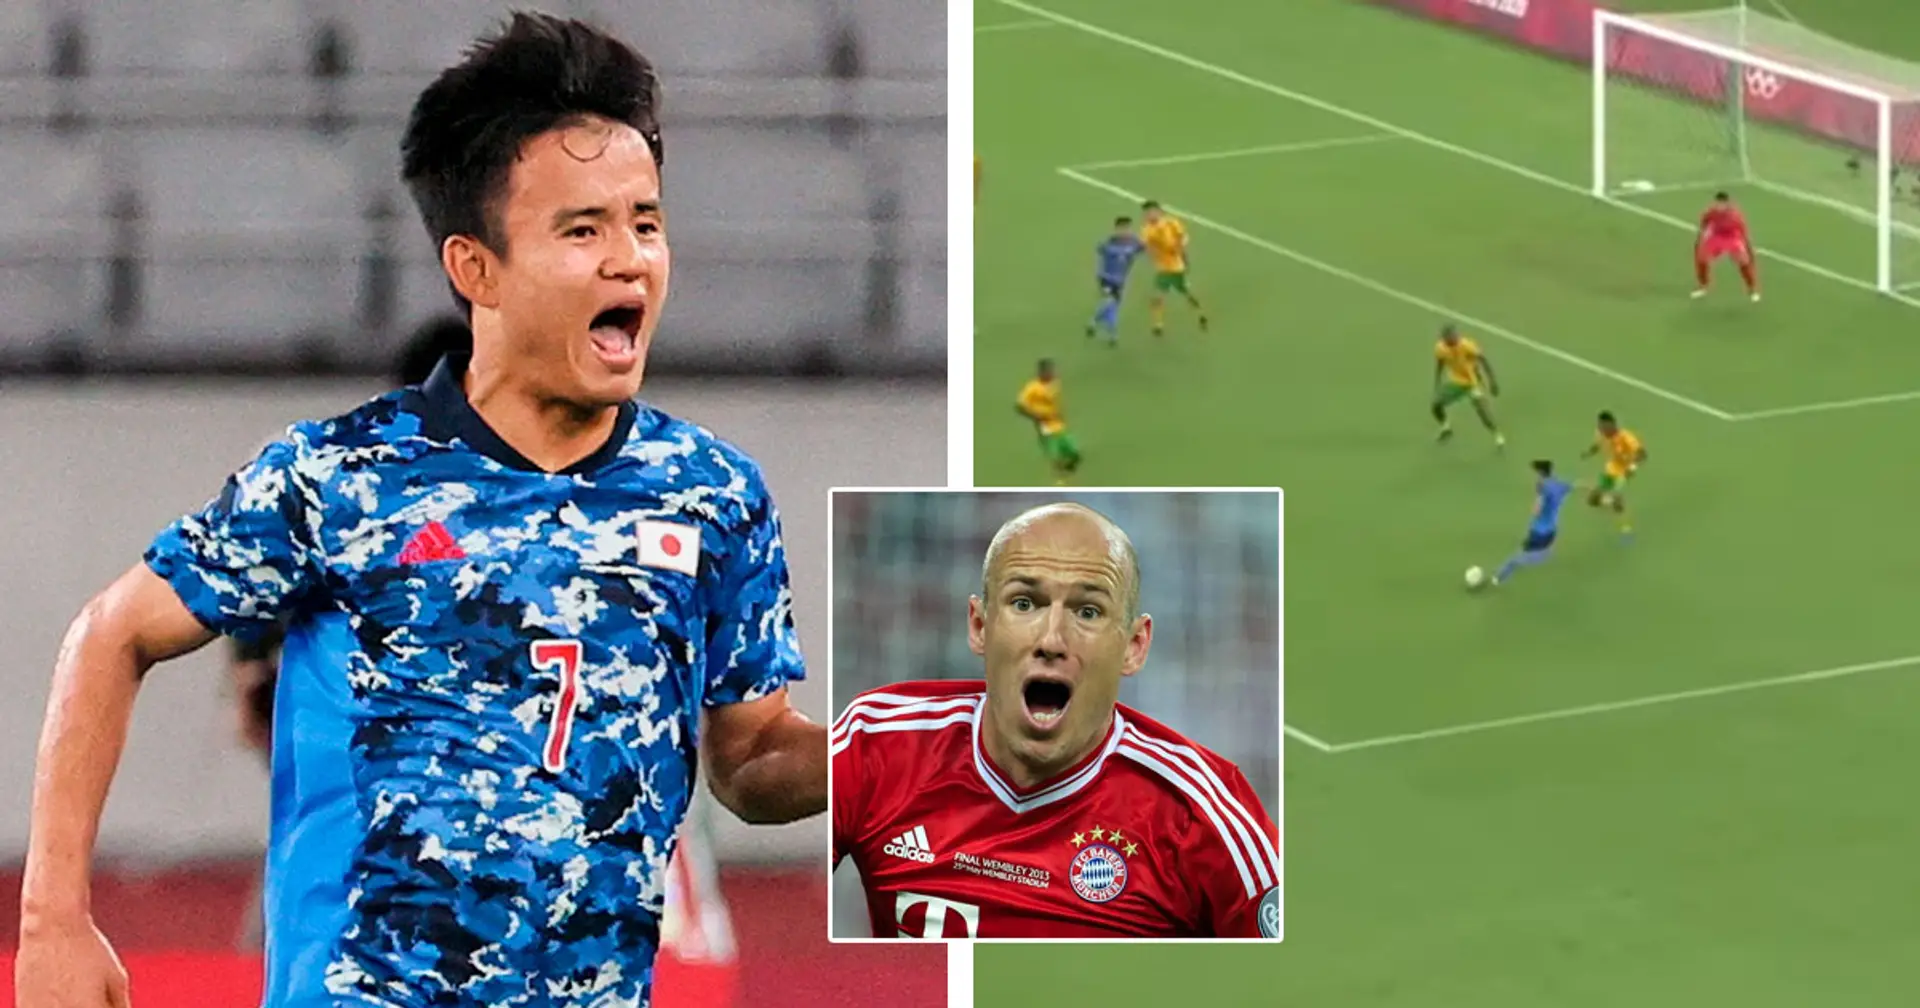 Kubo wins match for Japan with inch-perfect Robben-esque goal